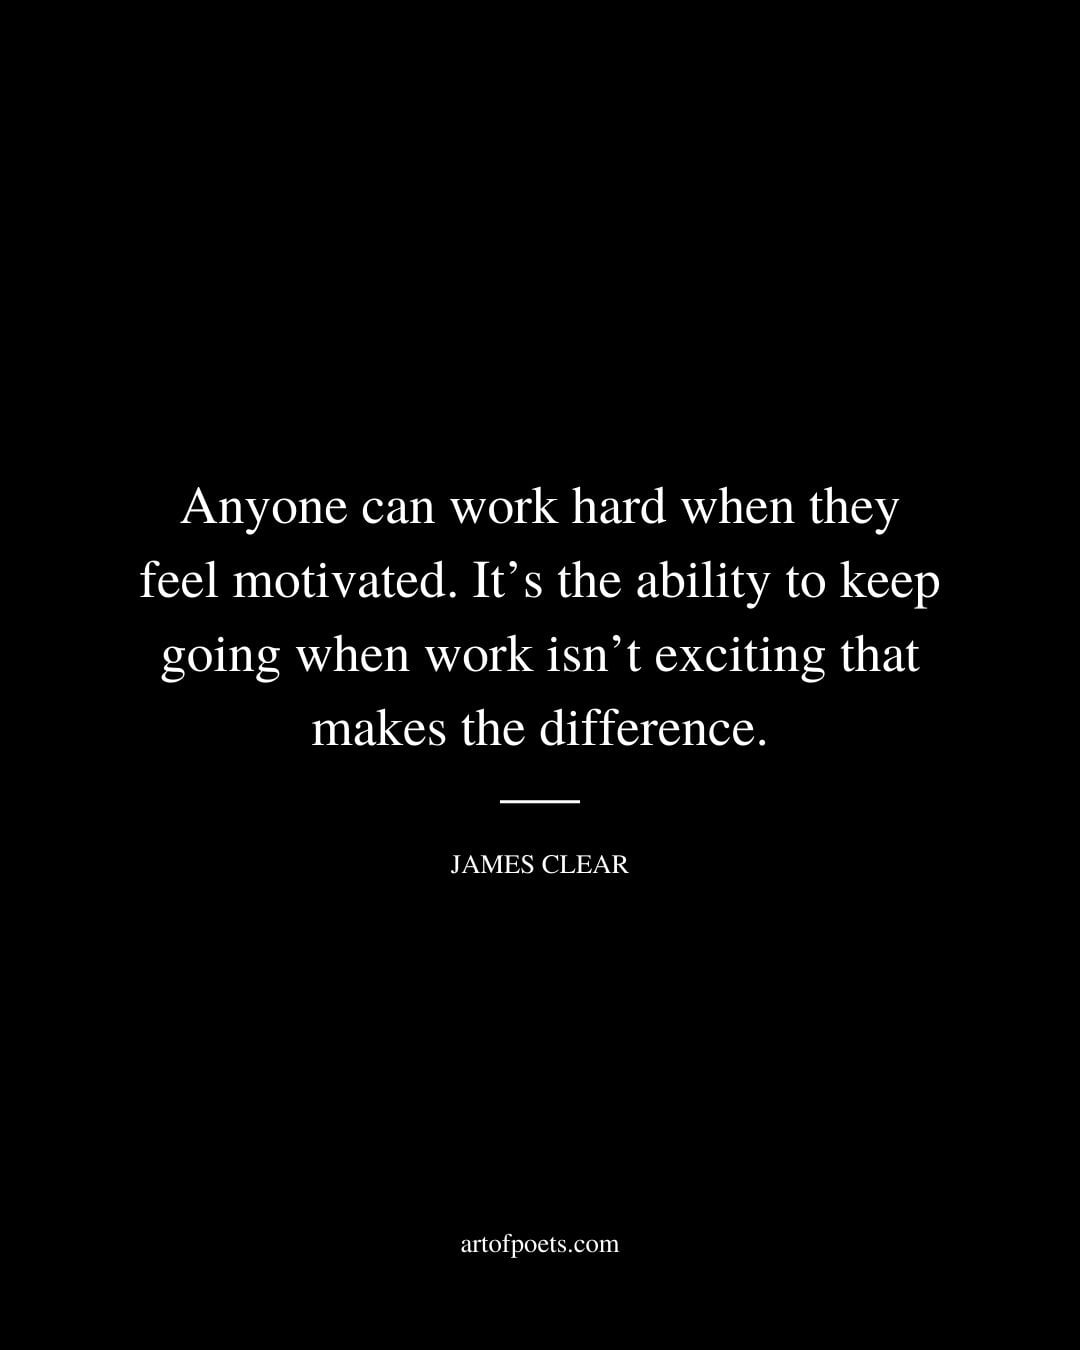 Anyone can work hard when they feel motivated. Its the ability to keep going when work isnt exciting that makes the difference